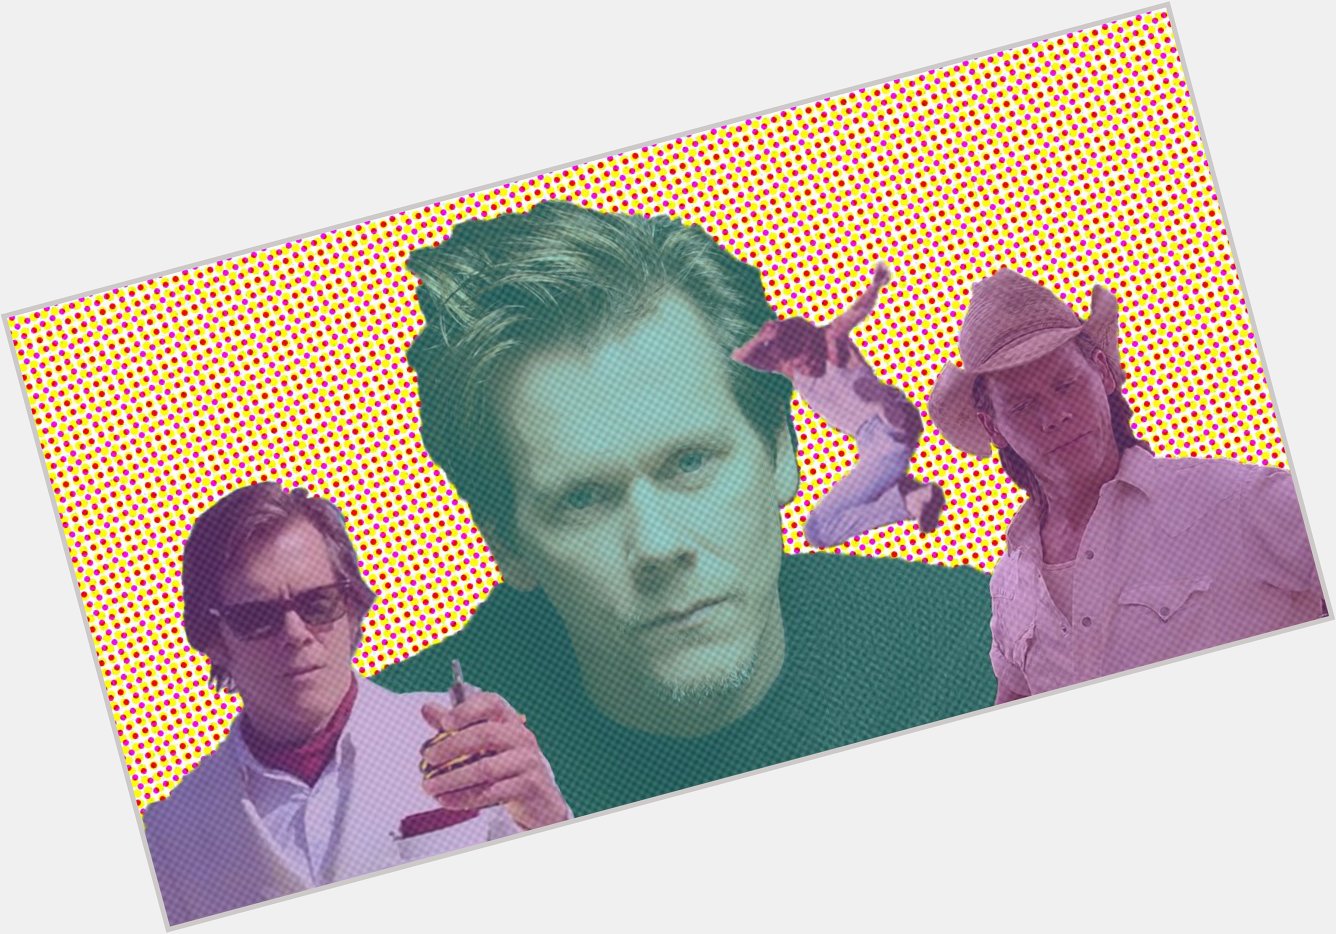 Happy Birthday to Kevin Bacon and everyone else separated from him by six degrees or less! 